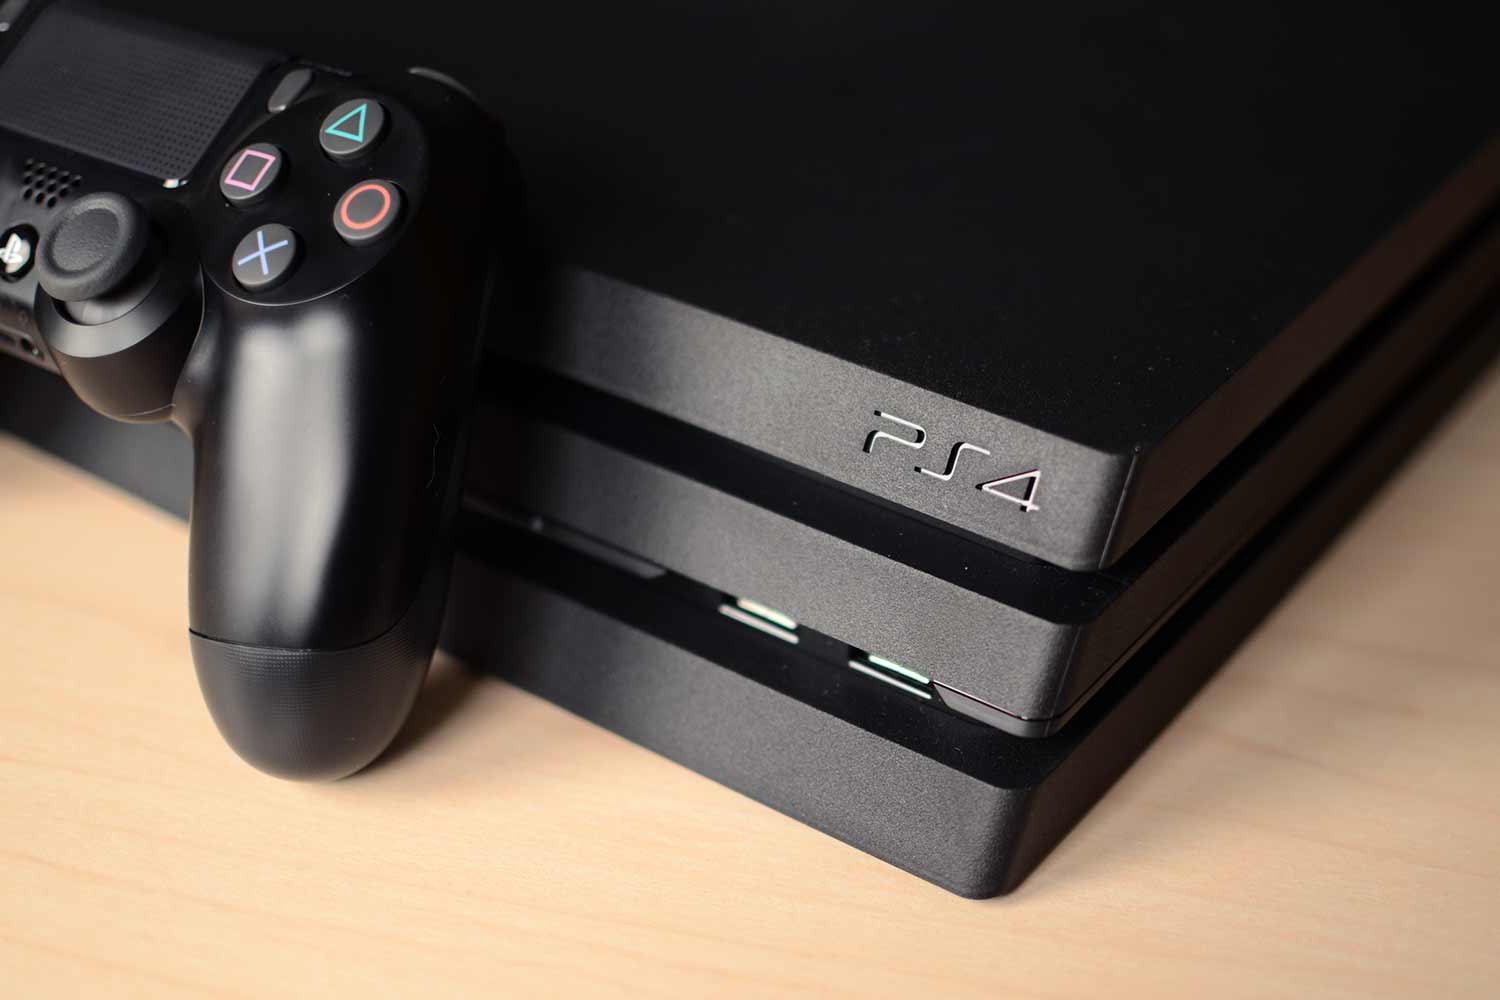 otte melodi Politibetjent How to Set Up HDR Gaming on Your 4k HDR TV and Playstation 4 or PS4 Pro |  Digital Trends